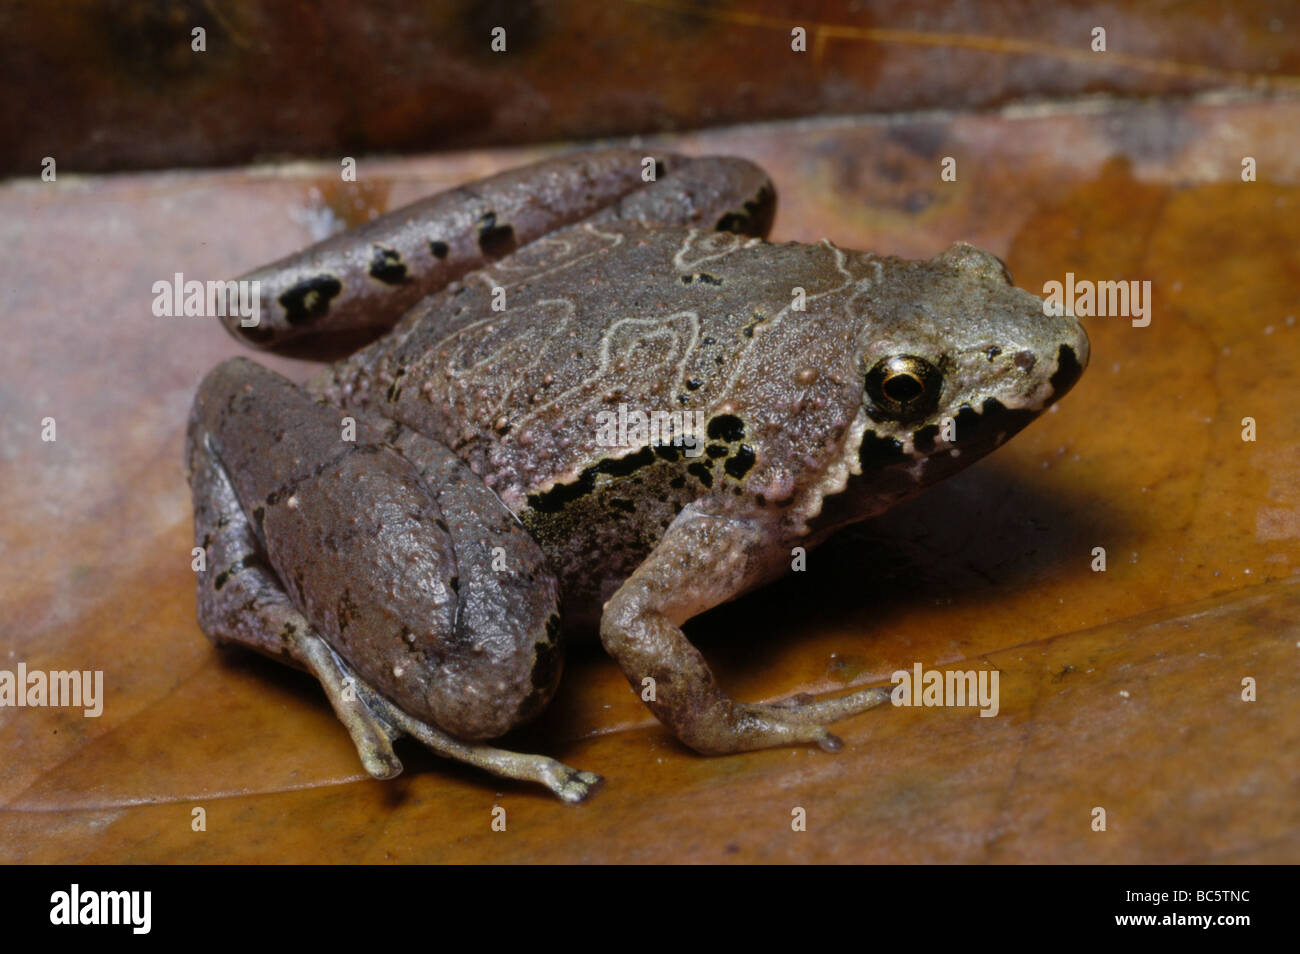 Borneo Narrow-mouthed Frog, Microhyla borneensis Stock Photo